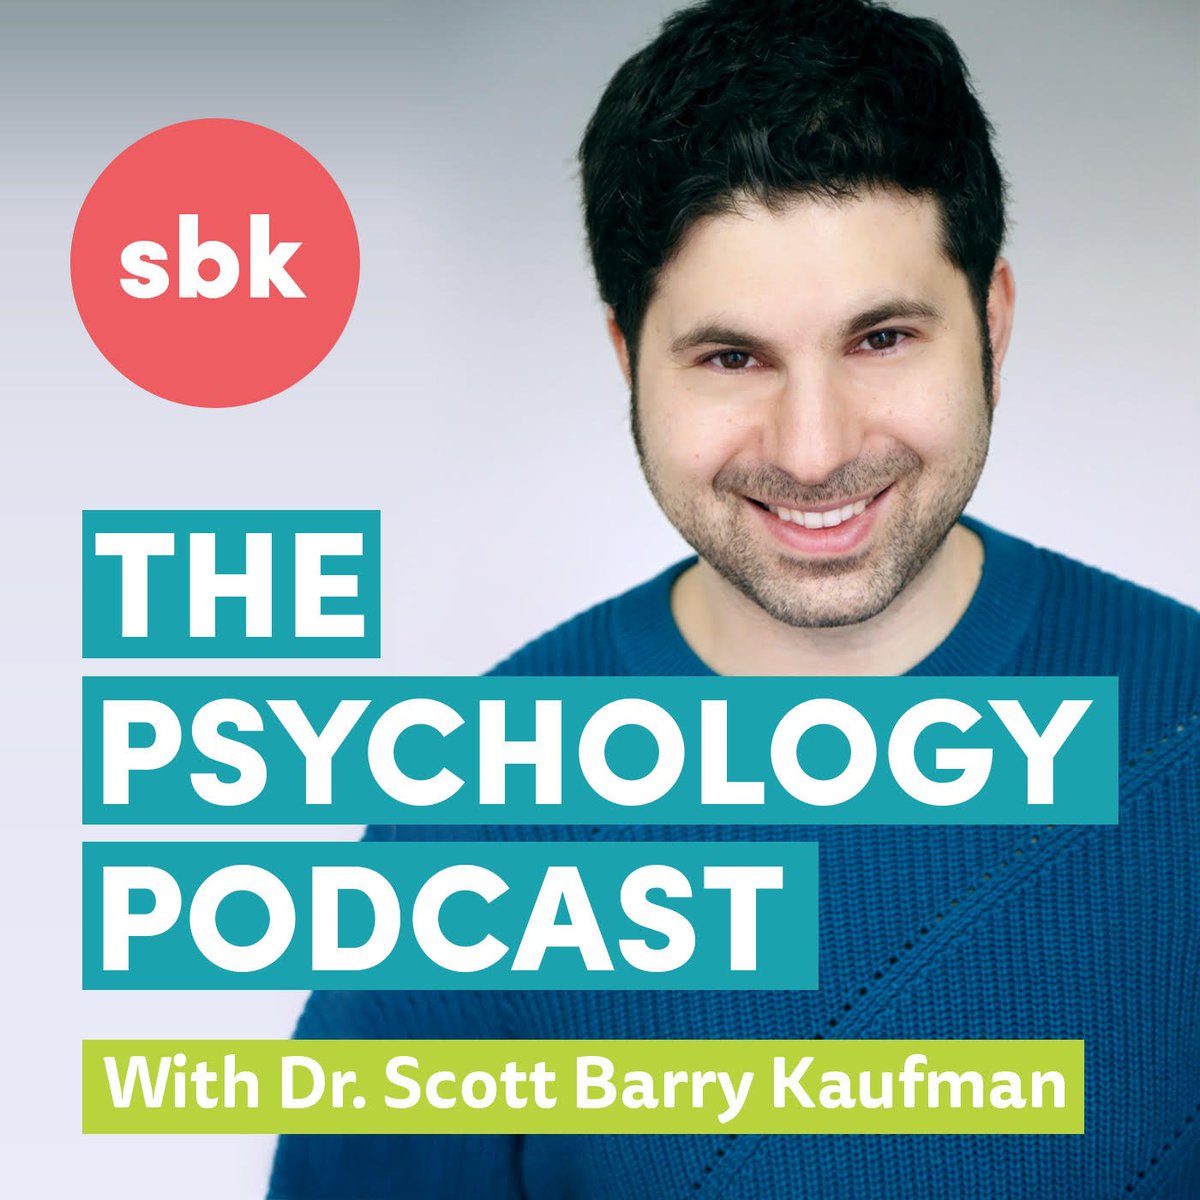 141: Solving the Mysteries of Consciousness, Free Will, and God #thePsychologyPodcast 
podplayer.net/?id=55695842 via @PodcastAddict